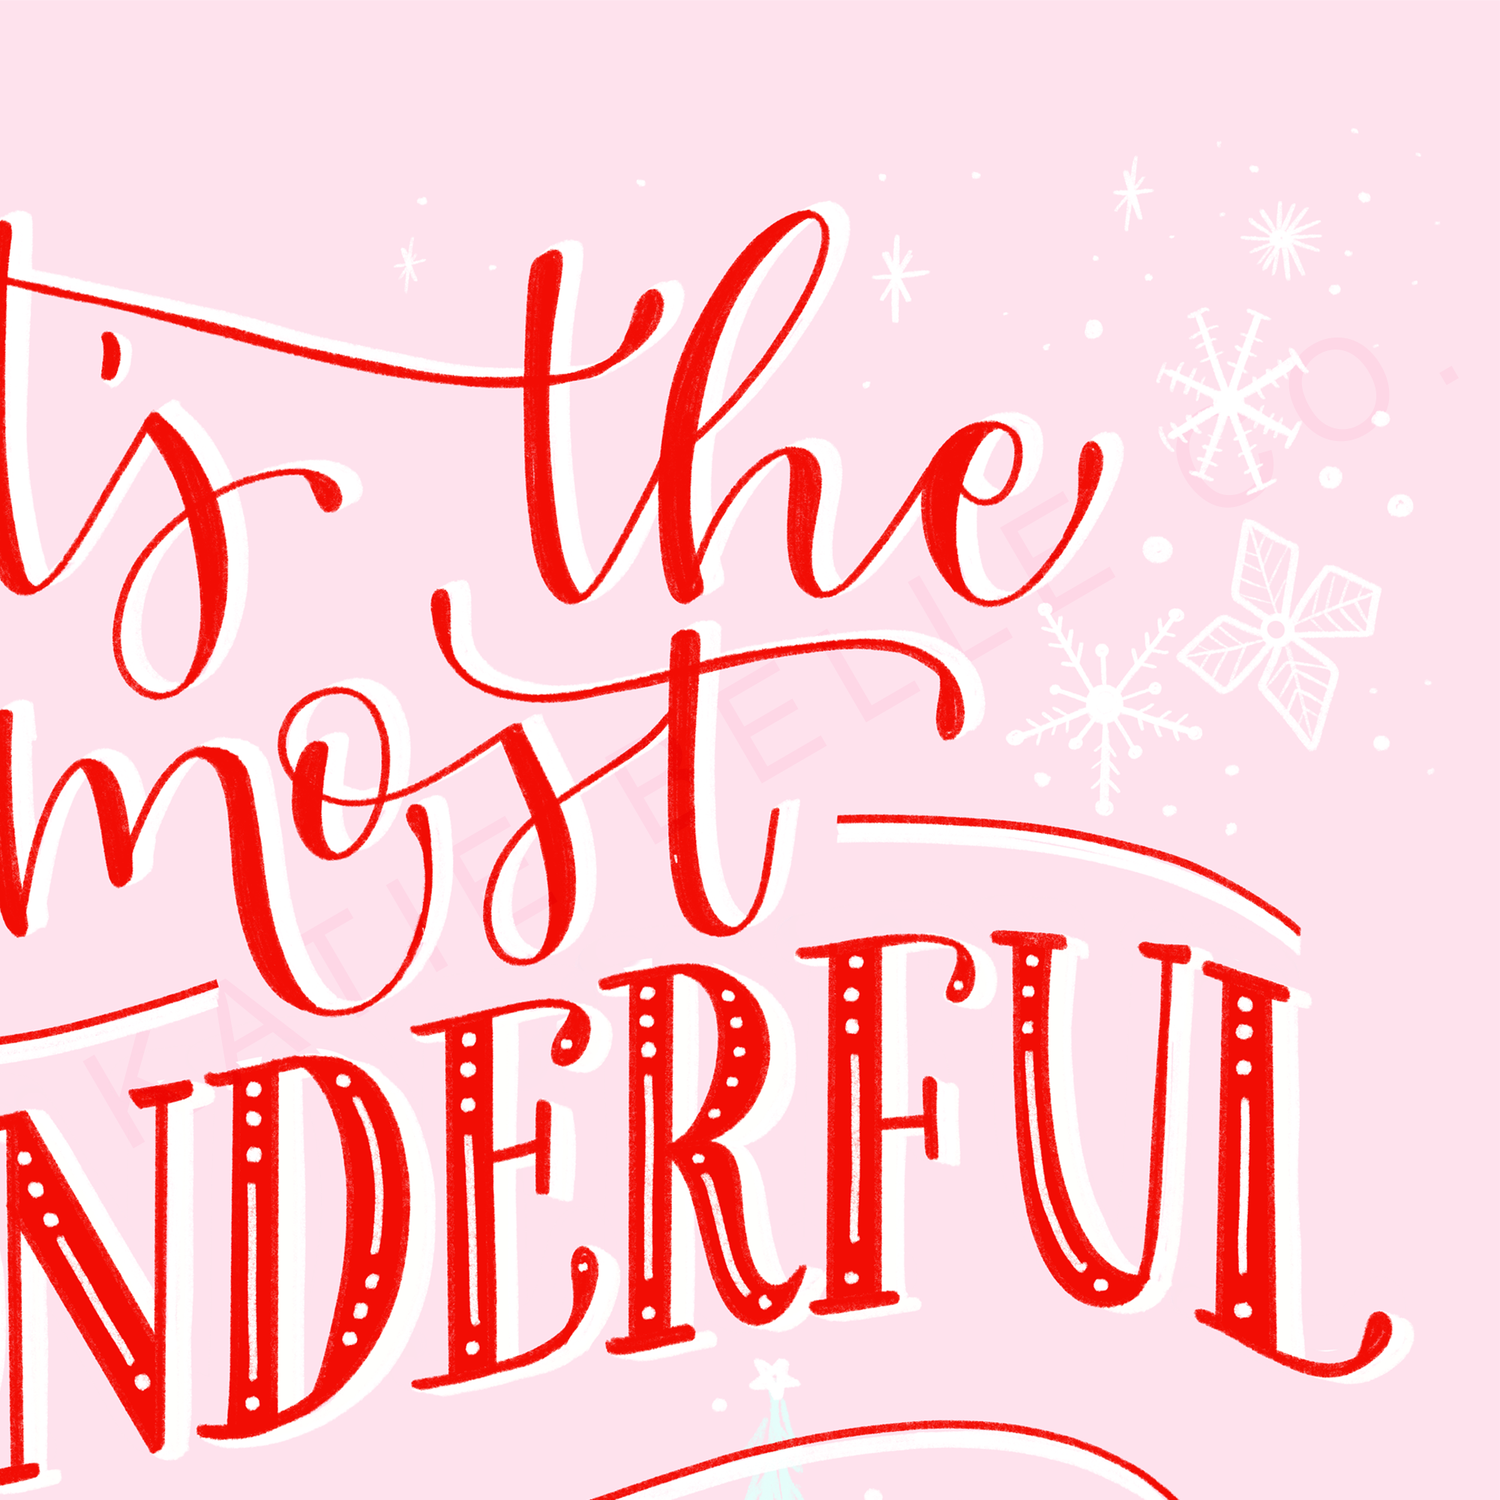 whimsical. pink. festive. christmas trees. snowflakes. red script font. christmas. holidays. holiday cheer. Our It's The Most Wonderful Time of the Year Art Print is a whimsical and festive addition to your holiday decor. Boasting charming pink hues and a delightful red script font, this piece will bring a touch of merry cheer to any room with its snowflakes, Christmas trees, and subtle holiday motifs. Unwrap some holiday magic this season with a classic touch. Katie belle co.